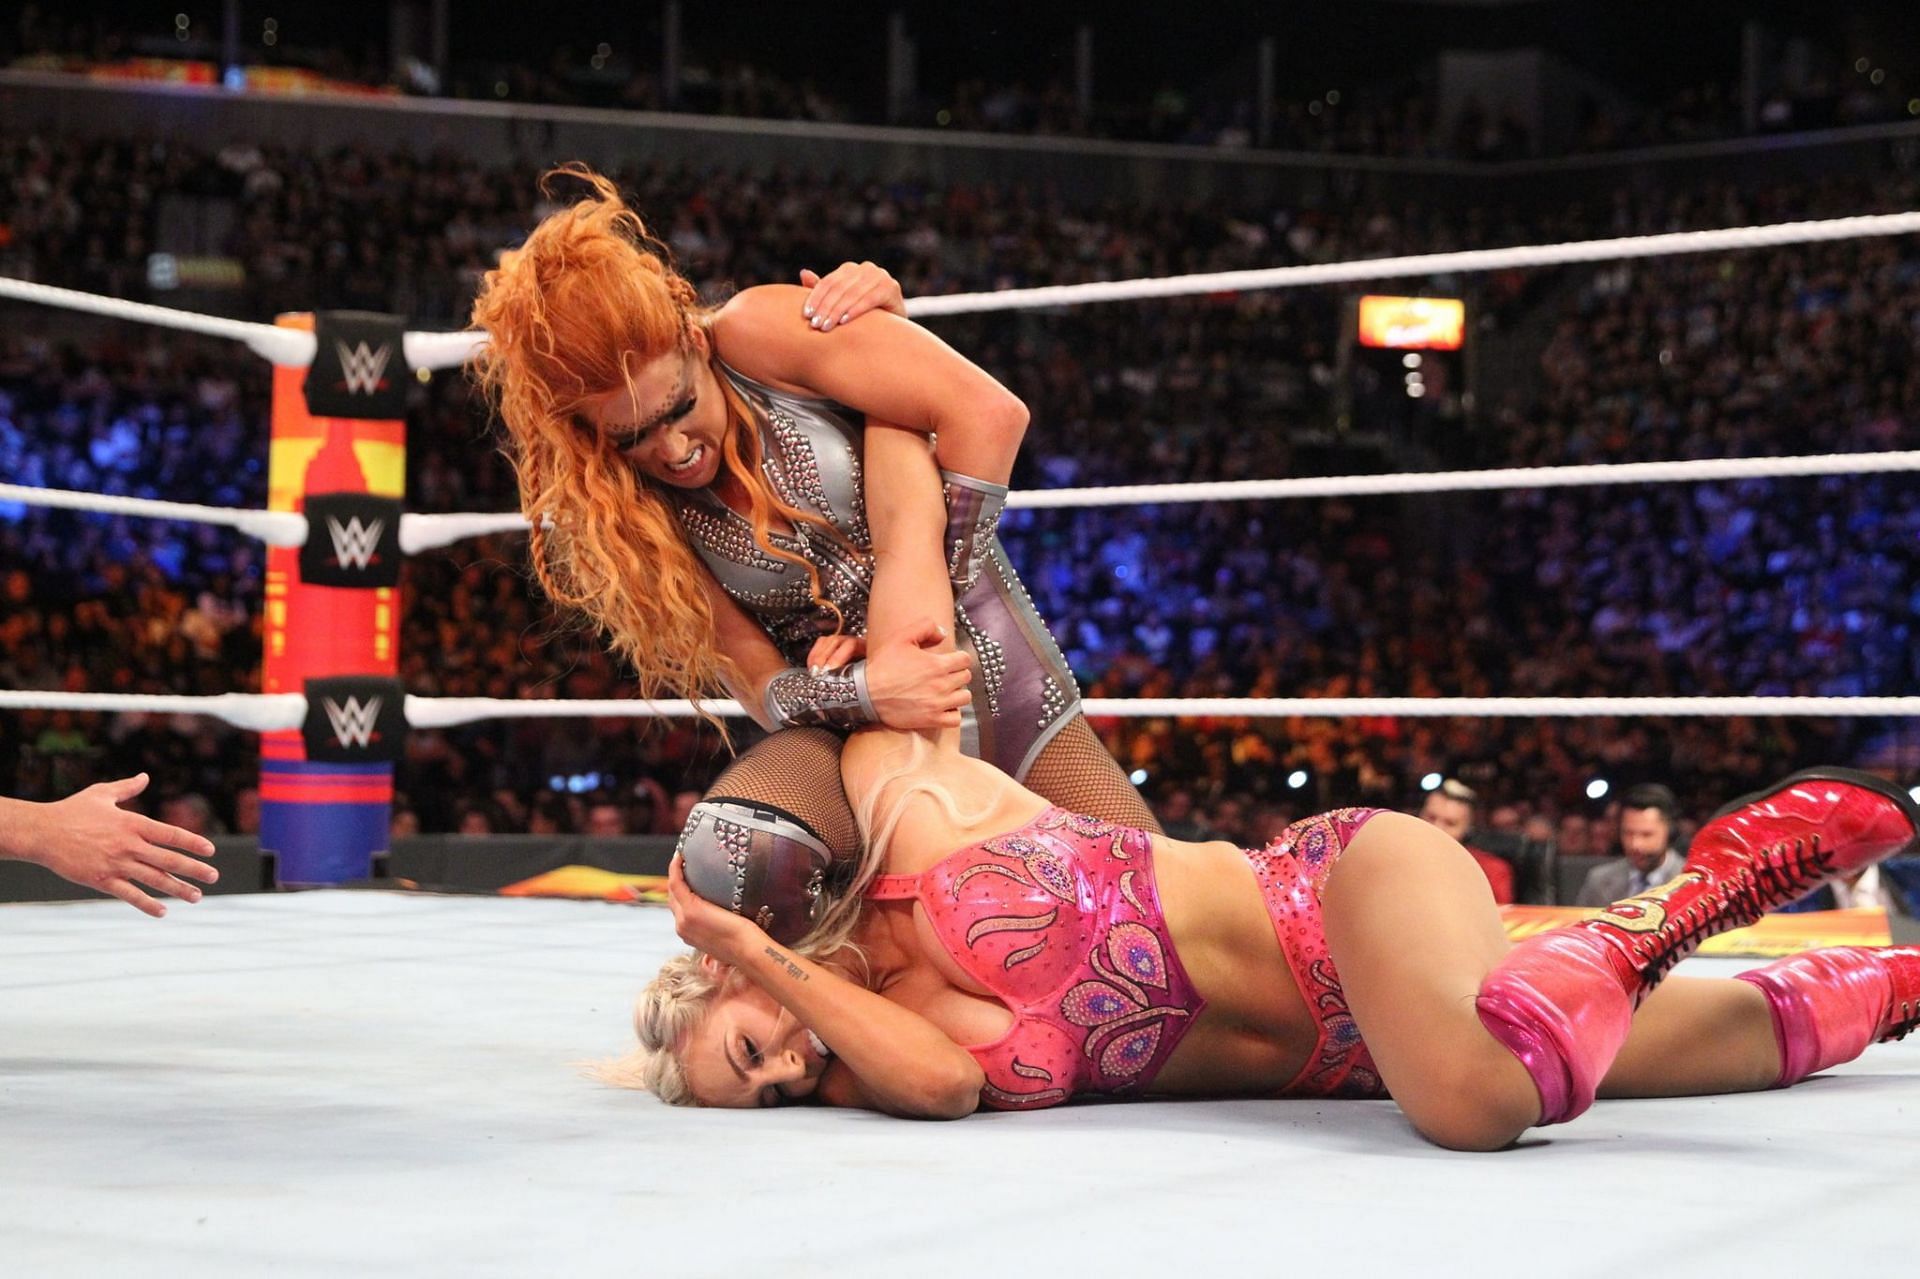 When Becky Lynch attacked Charlotte Flair after their match at Summerslam 2018 in what was supposed to be a heel turn, the fans instead burst into raucous applause and cheered her on